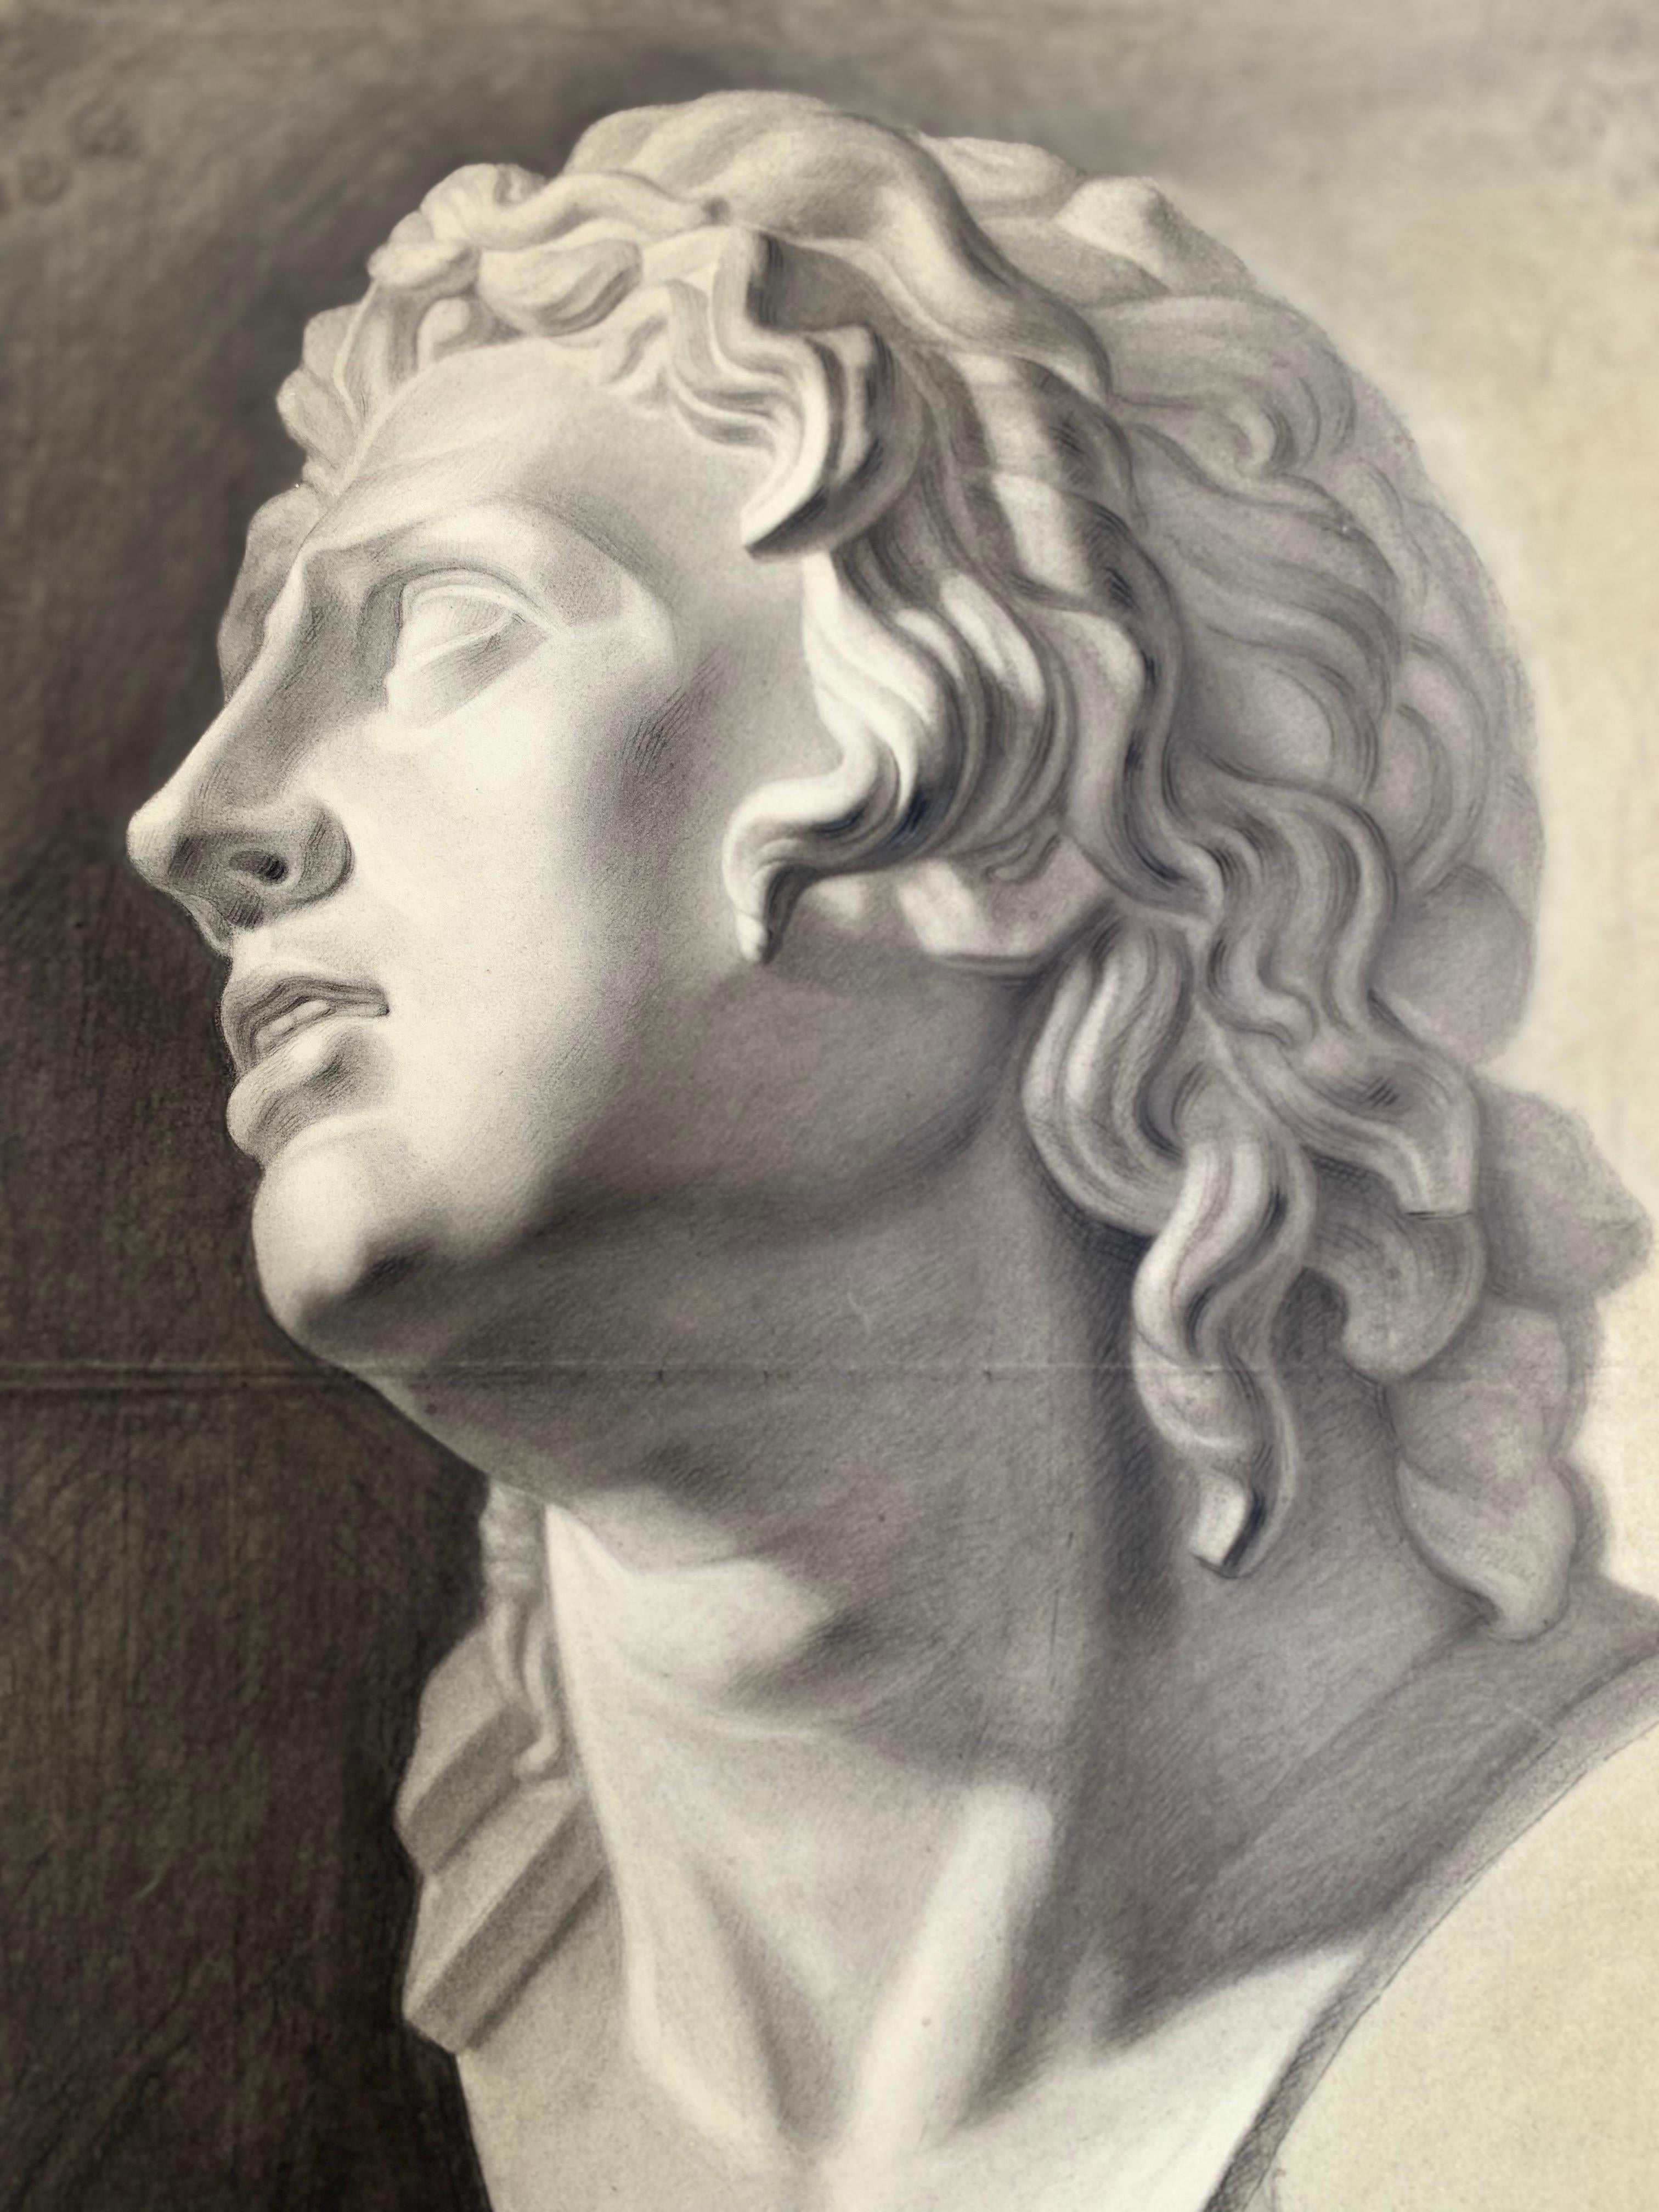 Unknown Figurative Art - Large XIXth cent. Academic drawing of Alexander The Great��’s bust from Uffizi. 